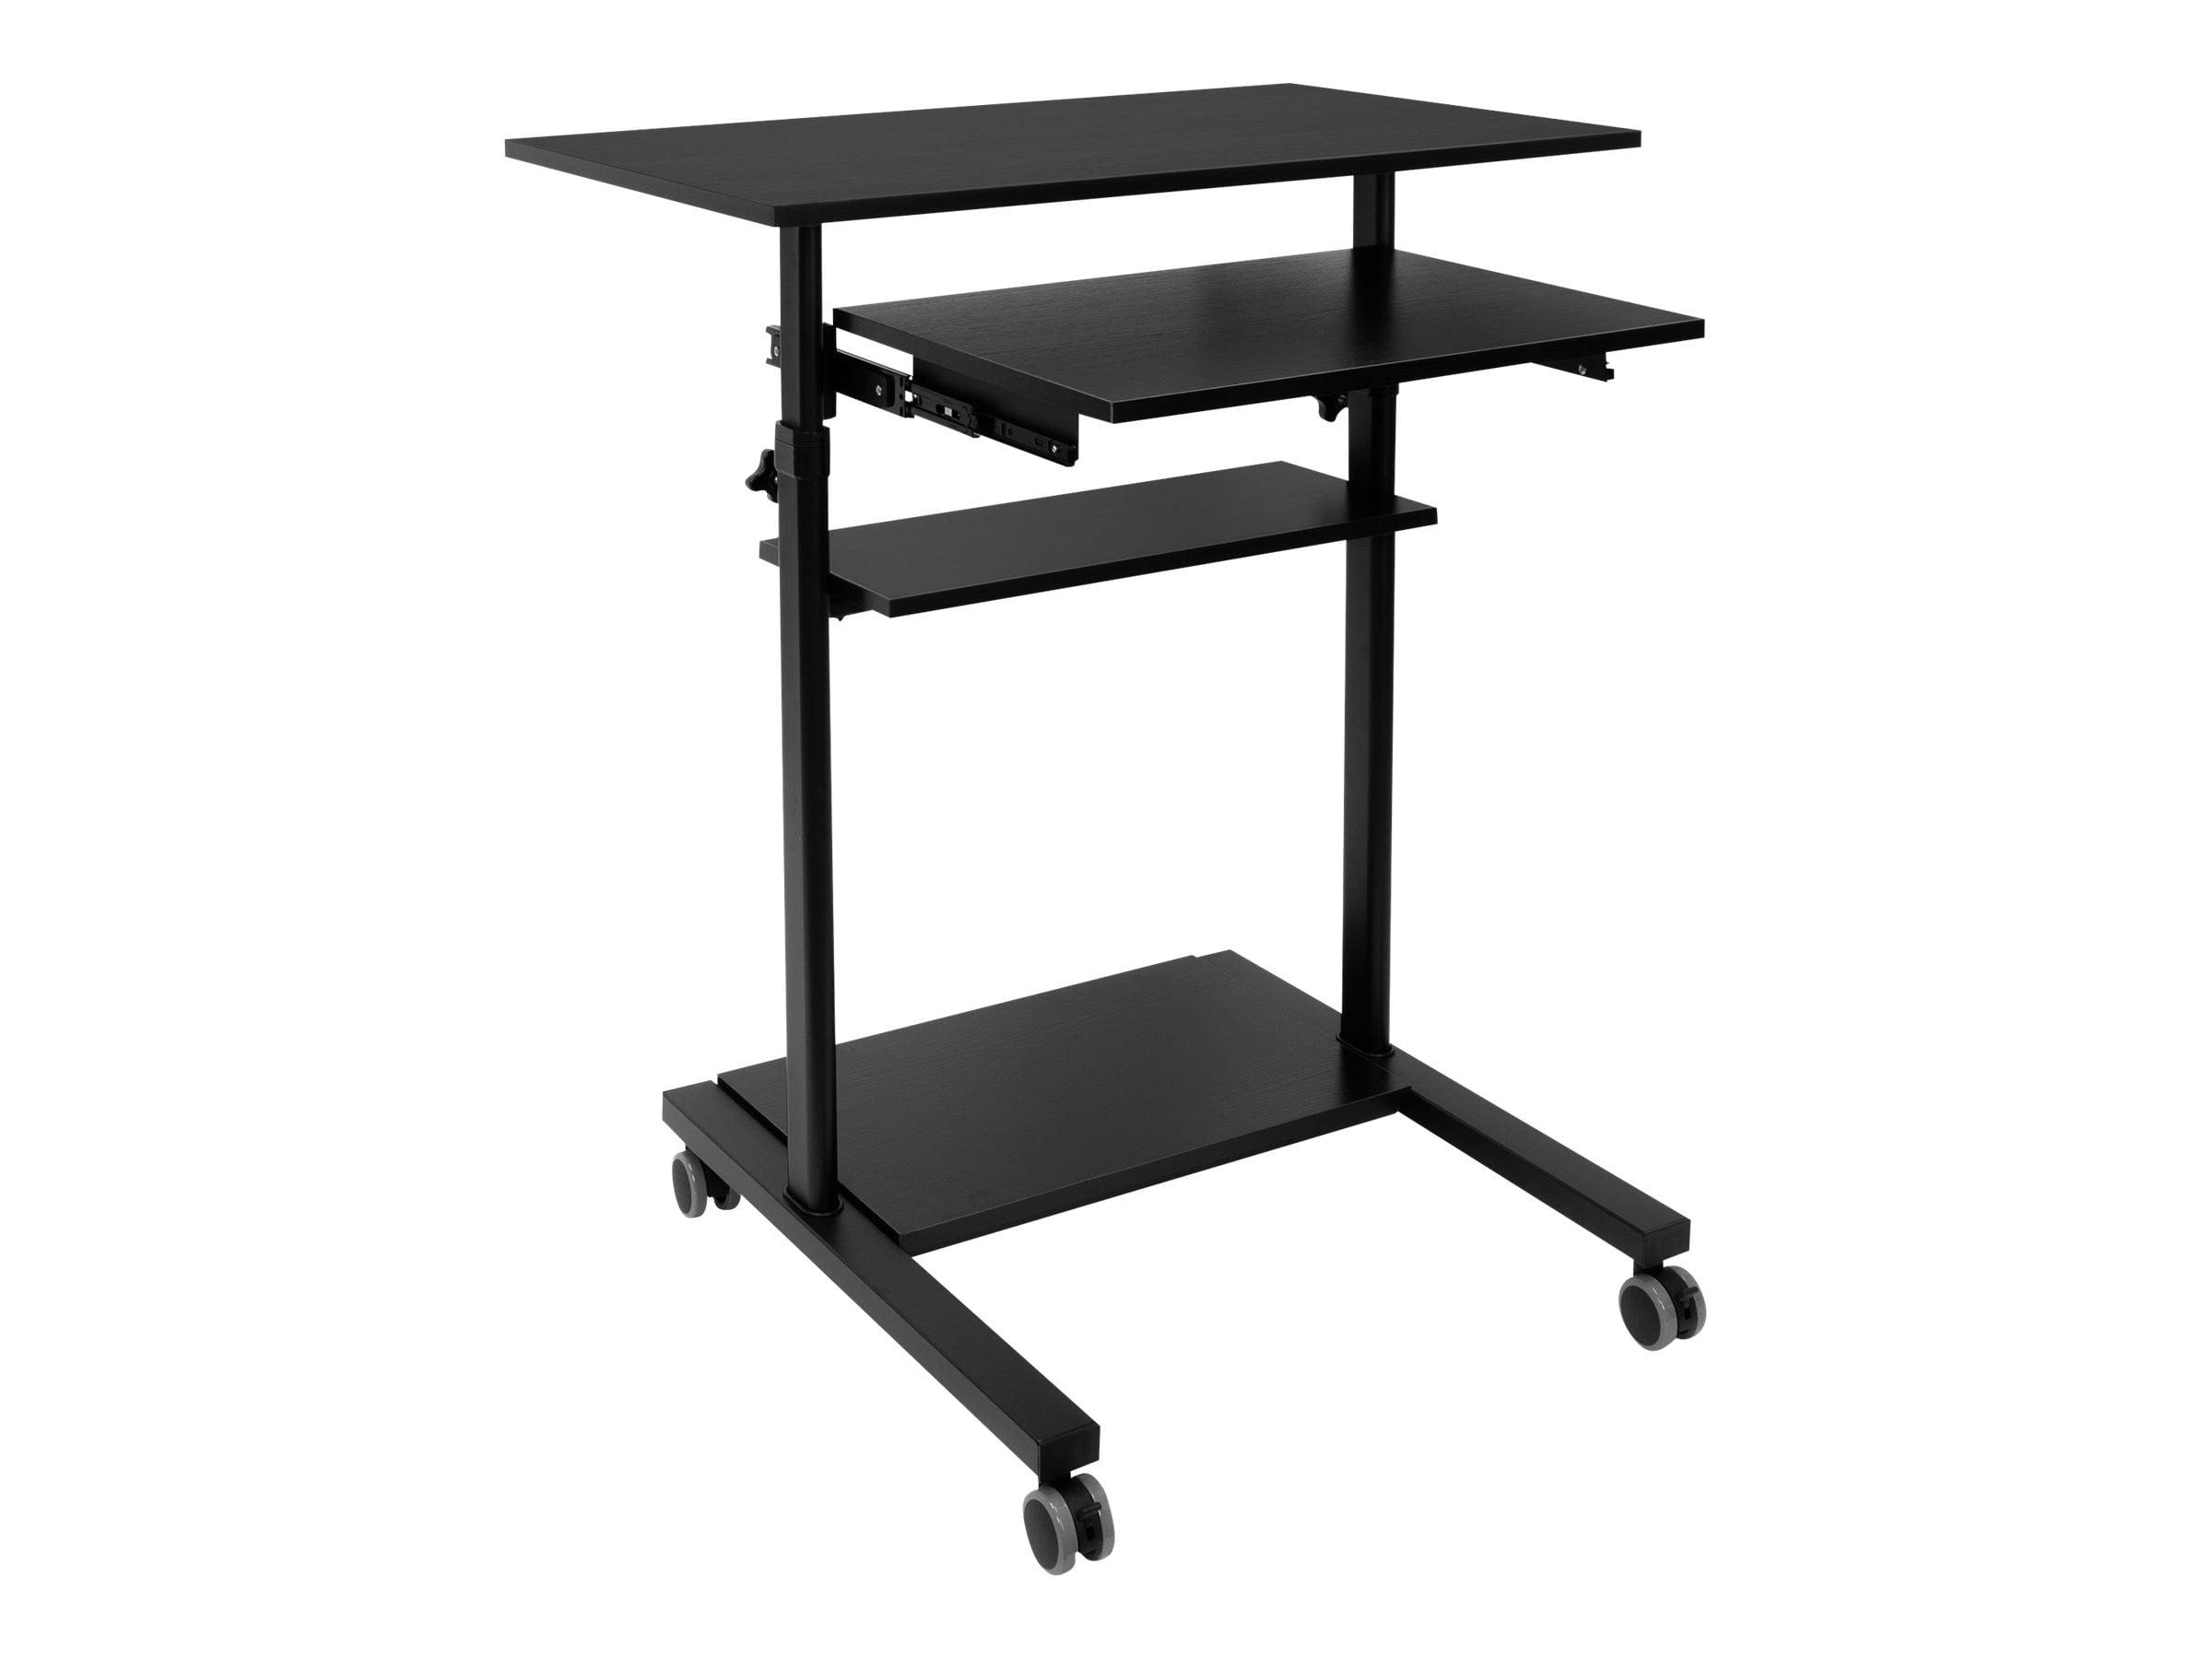 Adjustable 32" Black Wood Mobile Sit/Stand Desk with Keyboard Tray